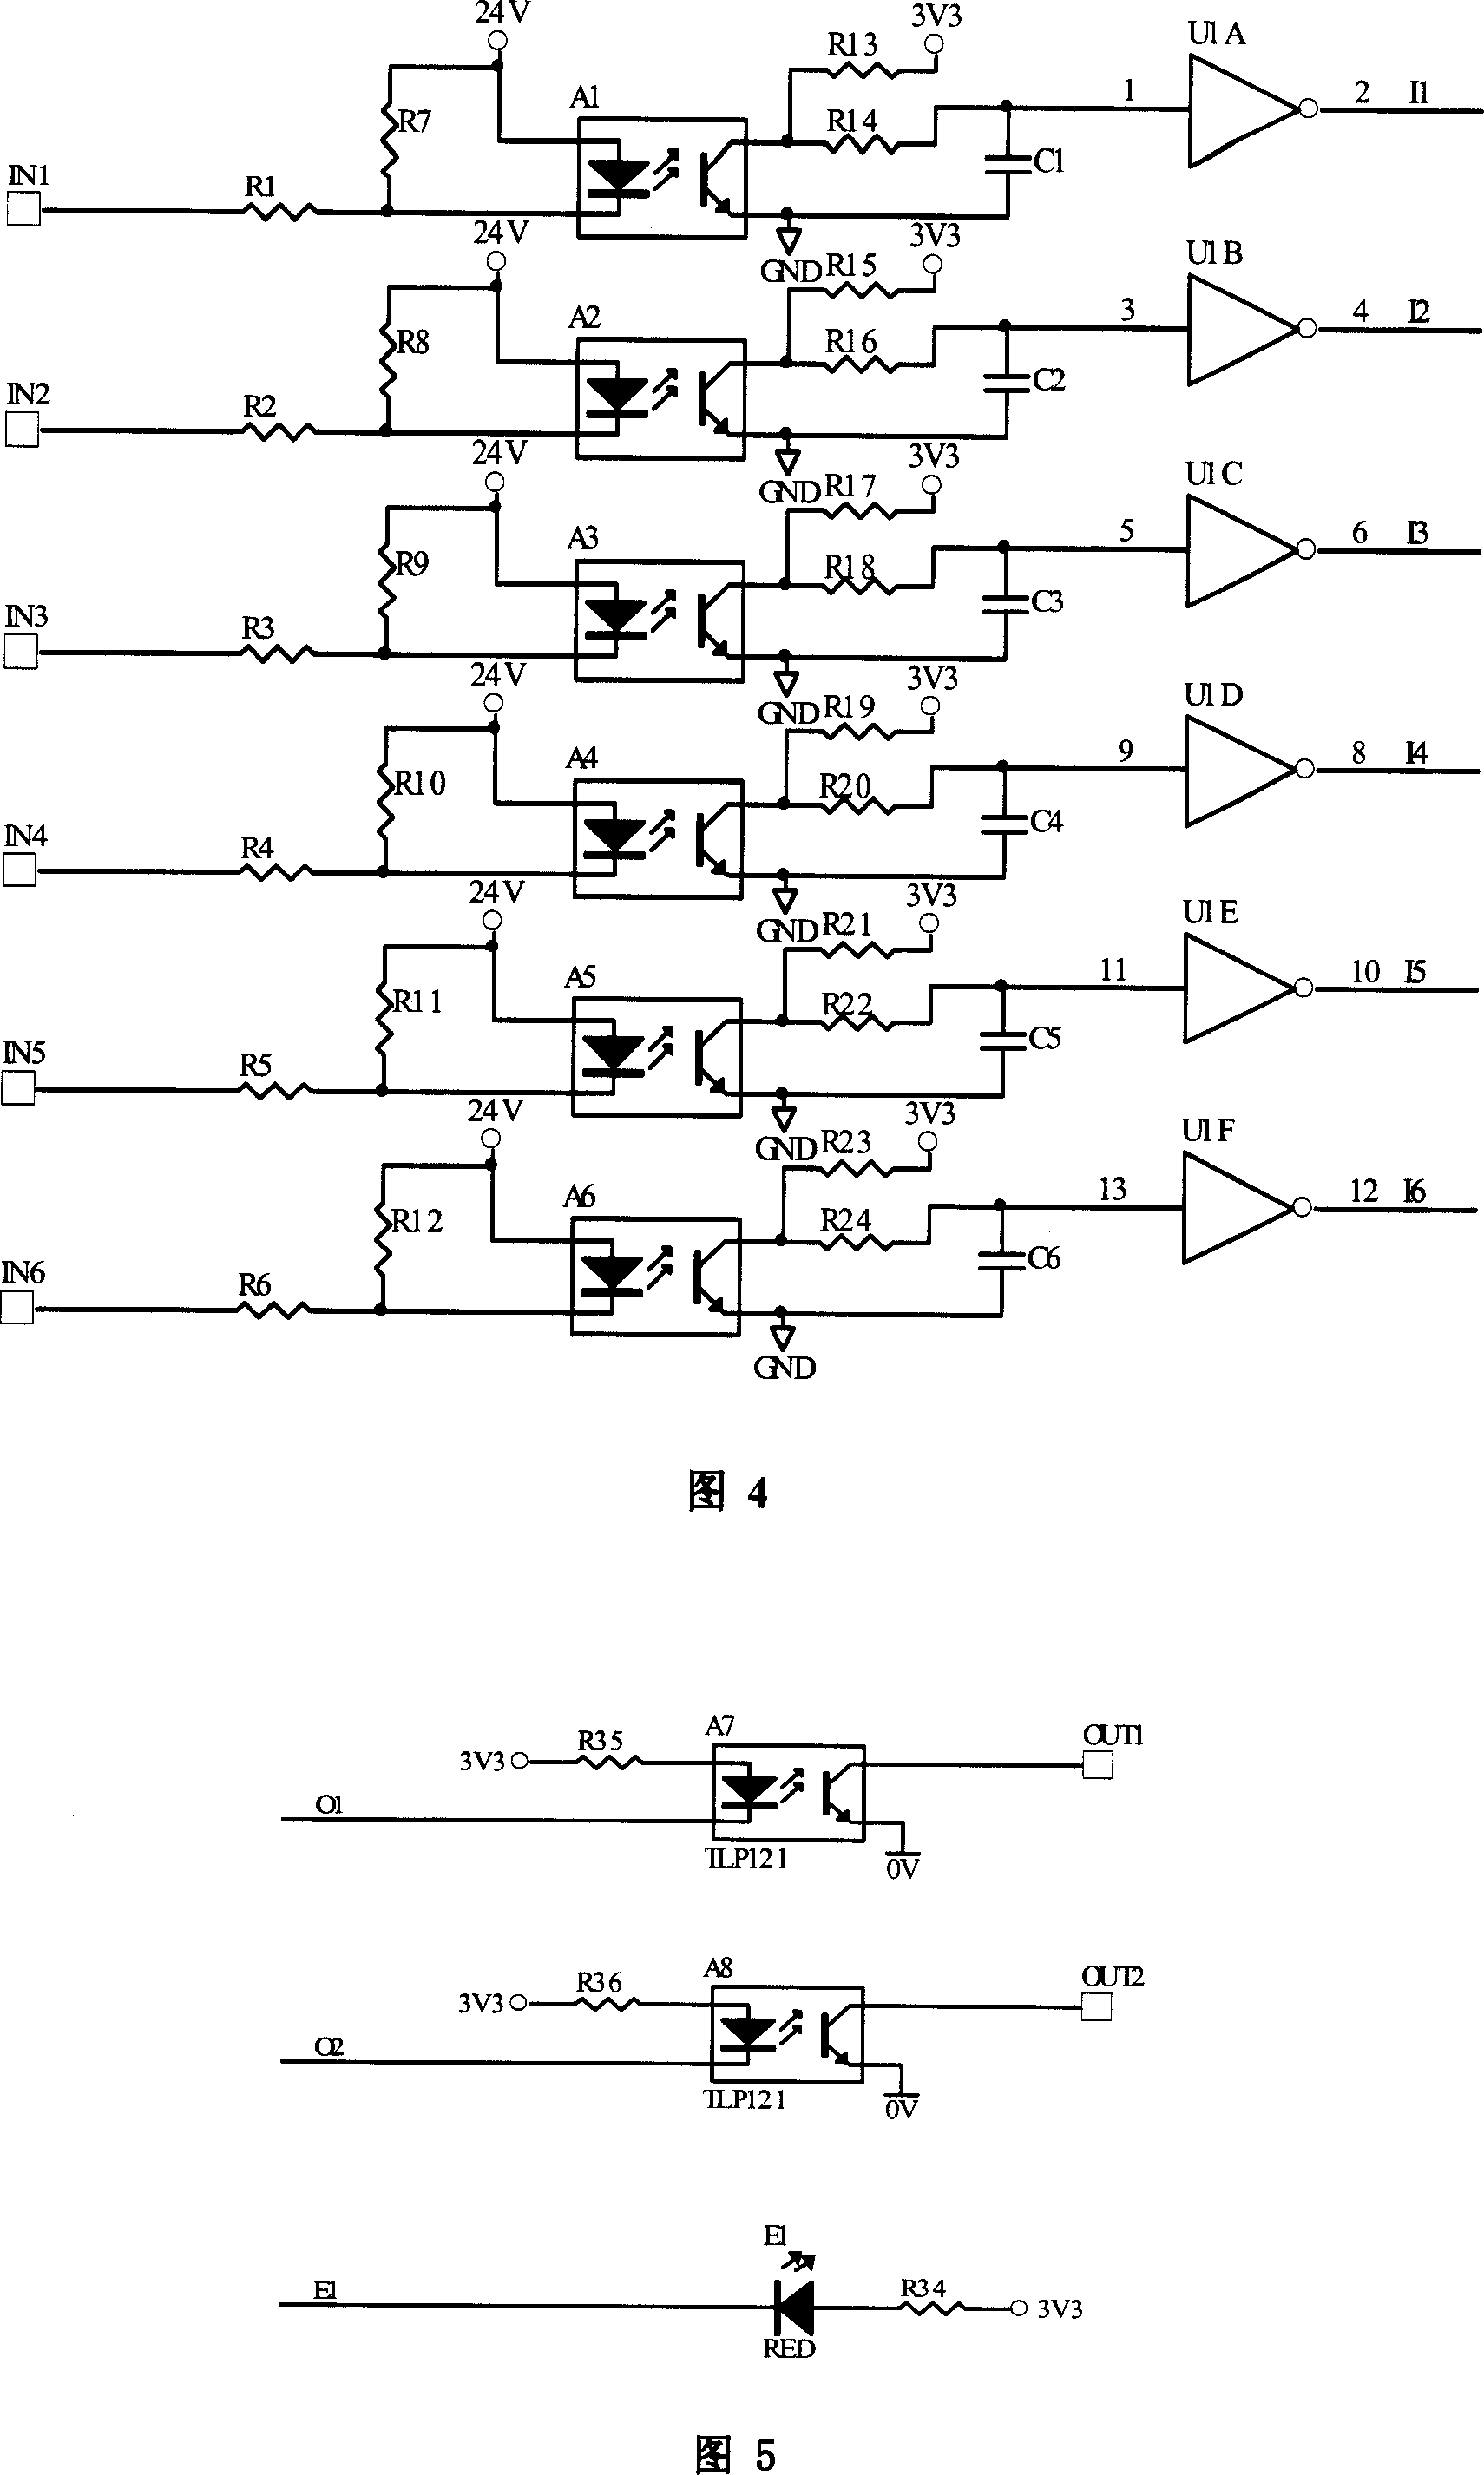 Network system for managing textile equipment